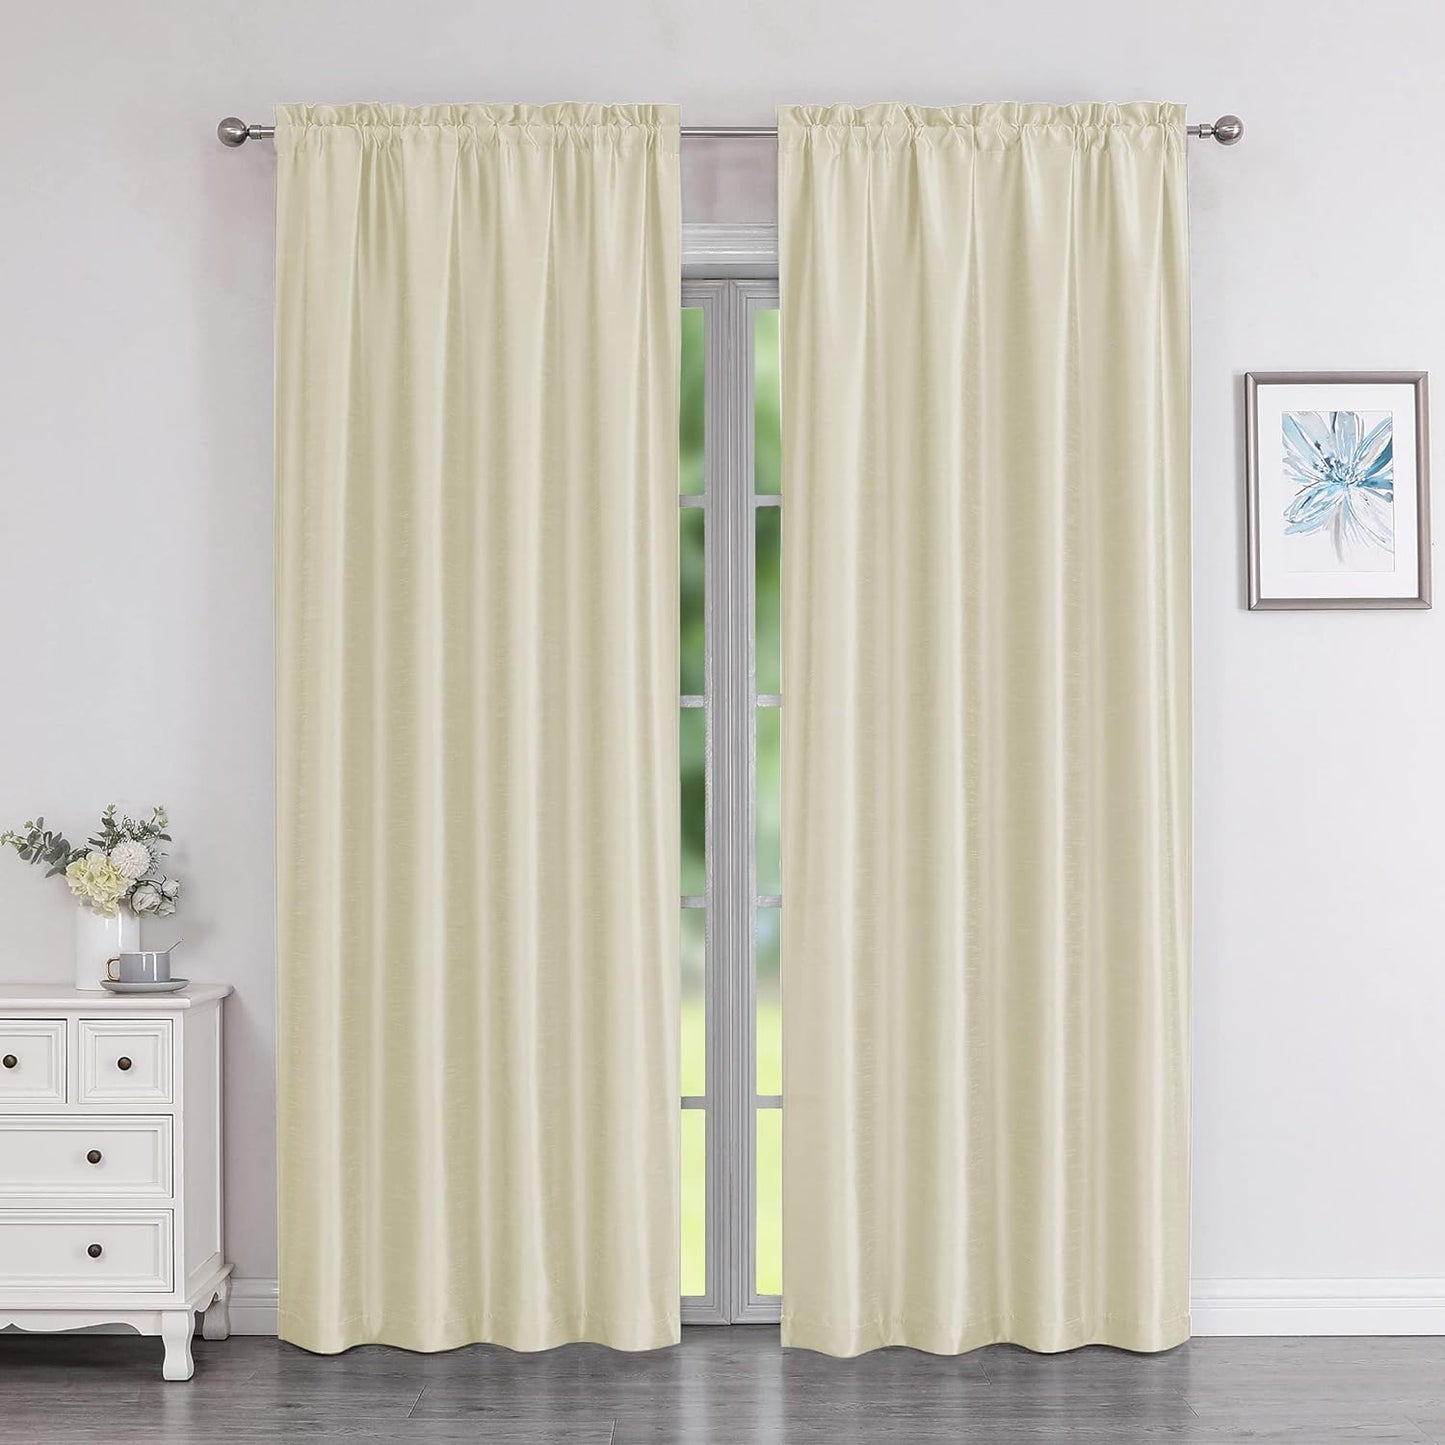 Chyhomenyc Uptown Sage Green Kitchen Curtains 45 Inch Length 2 Panels, Room Darkening Faux Silk Chic Fabric Short Window Curtains for Bedroom Living Room, Each 30Wx45L  Chyhomenyc Ivory 2X40"Wx84"L 